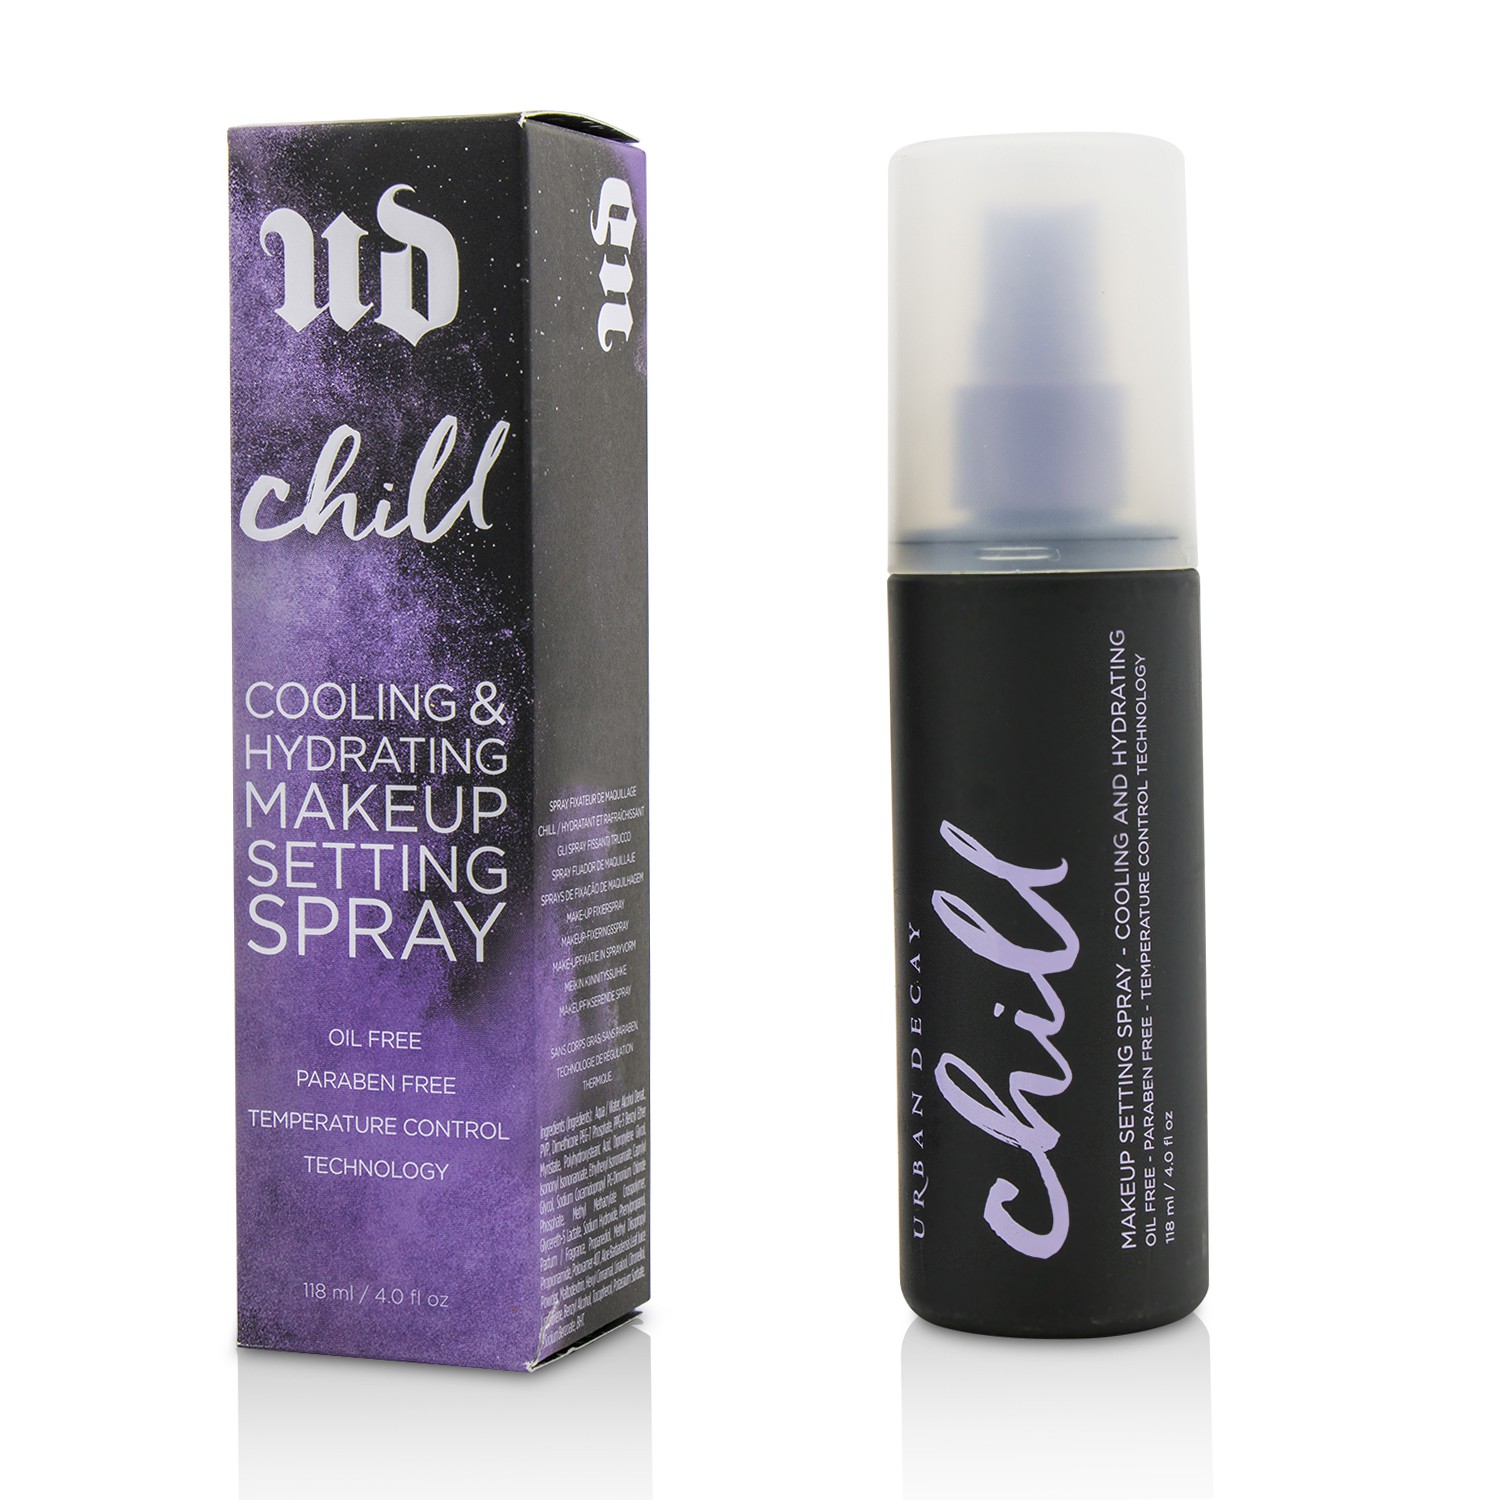 Chill Cooling and Hydrating Makeup Setting Spray Urban Decay Image